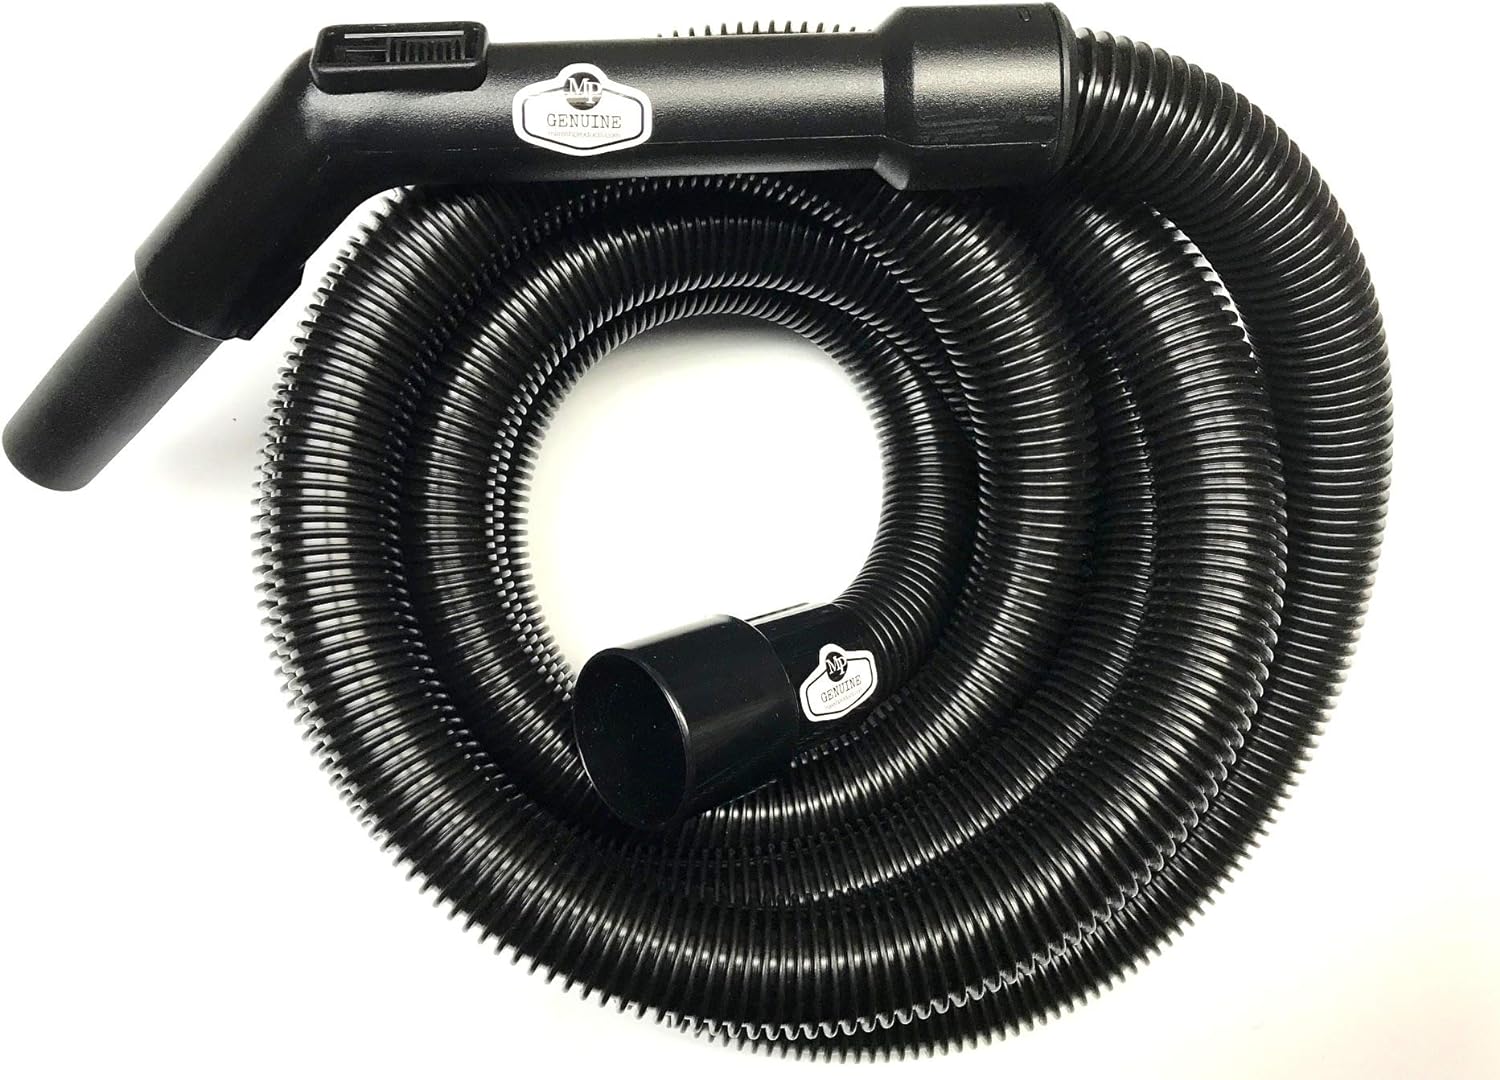 Replacement Shop-Vac 15 Foot Hose - Fits Vacuum Models with 2-1/4 Inch  Openings